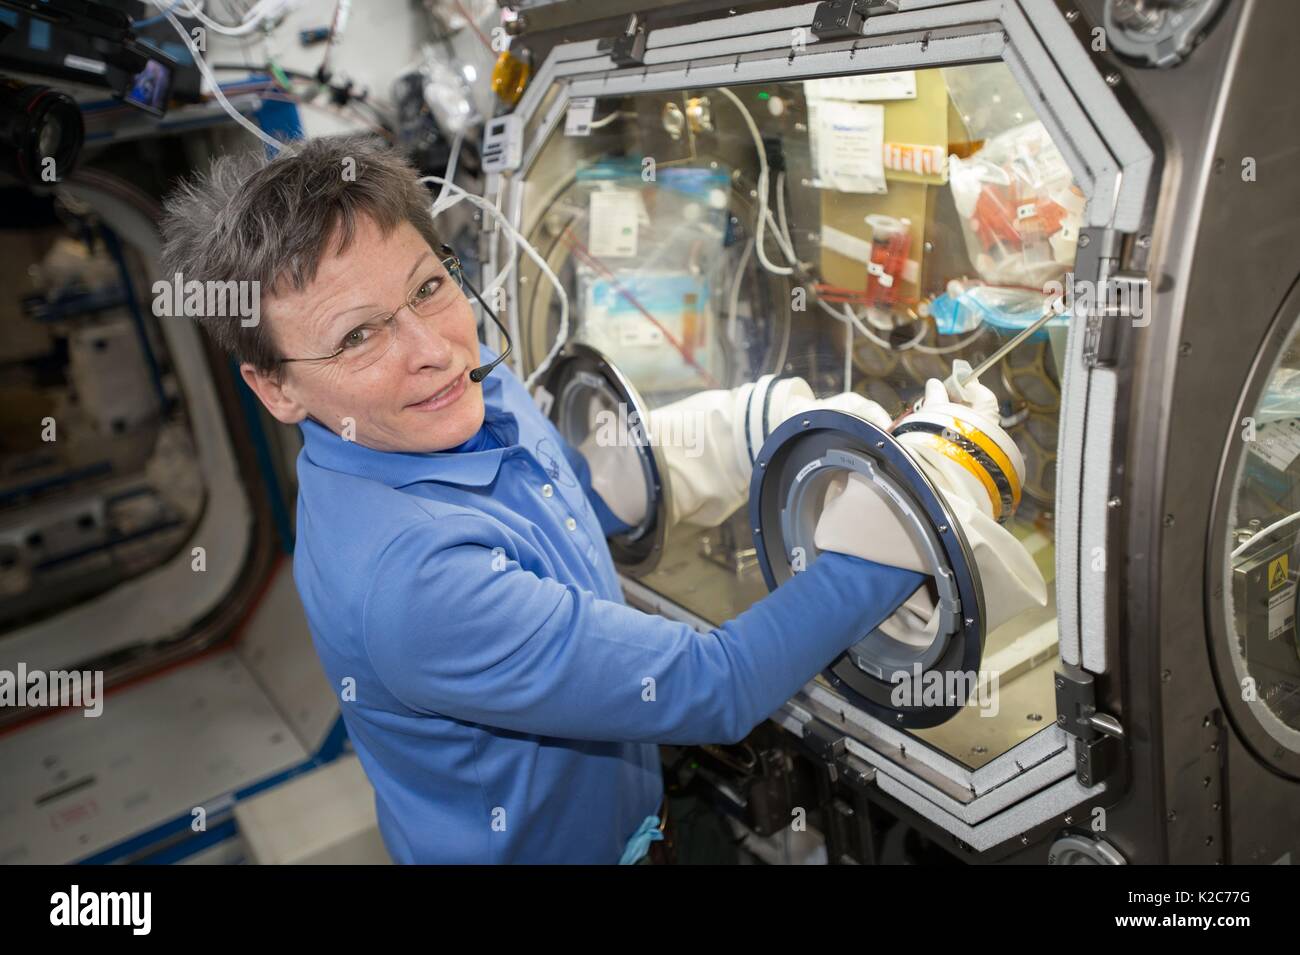 NASA International Space Station Expedition 51 prime crew member American astronaut Peggy Whitson works on an experiment inside the U.S. Destiny Laboratory Microgravity Science Glovebox May 2, 2017 in Earth orbit. Stock Photo